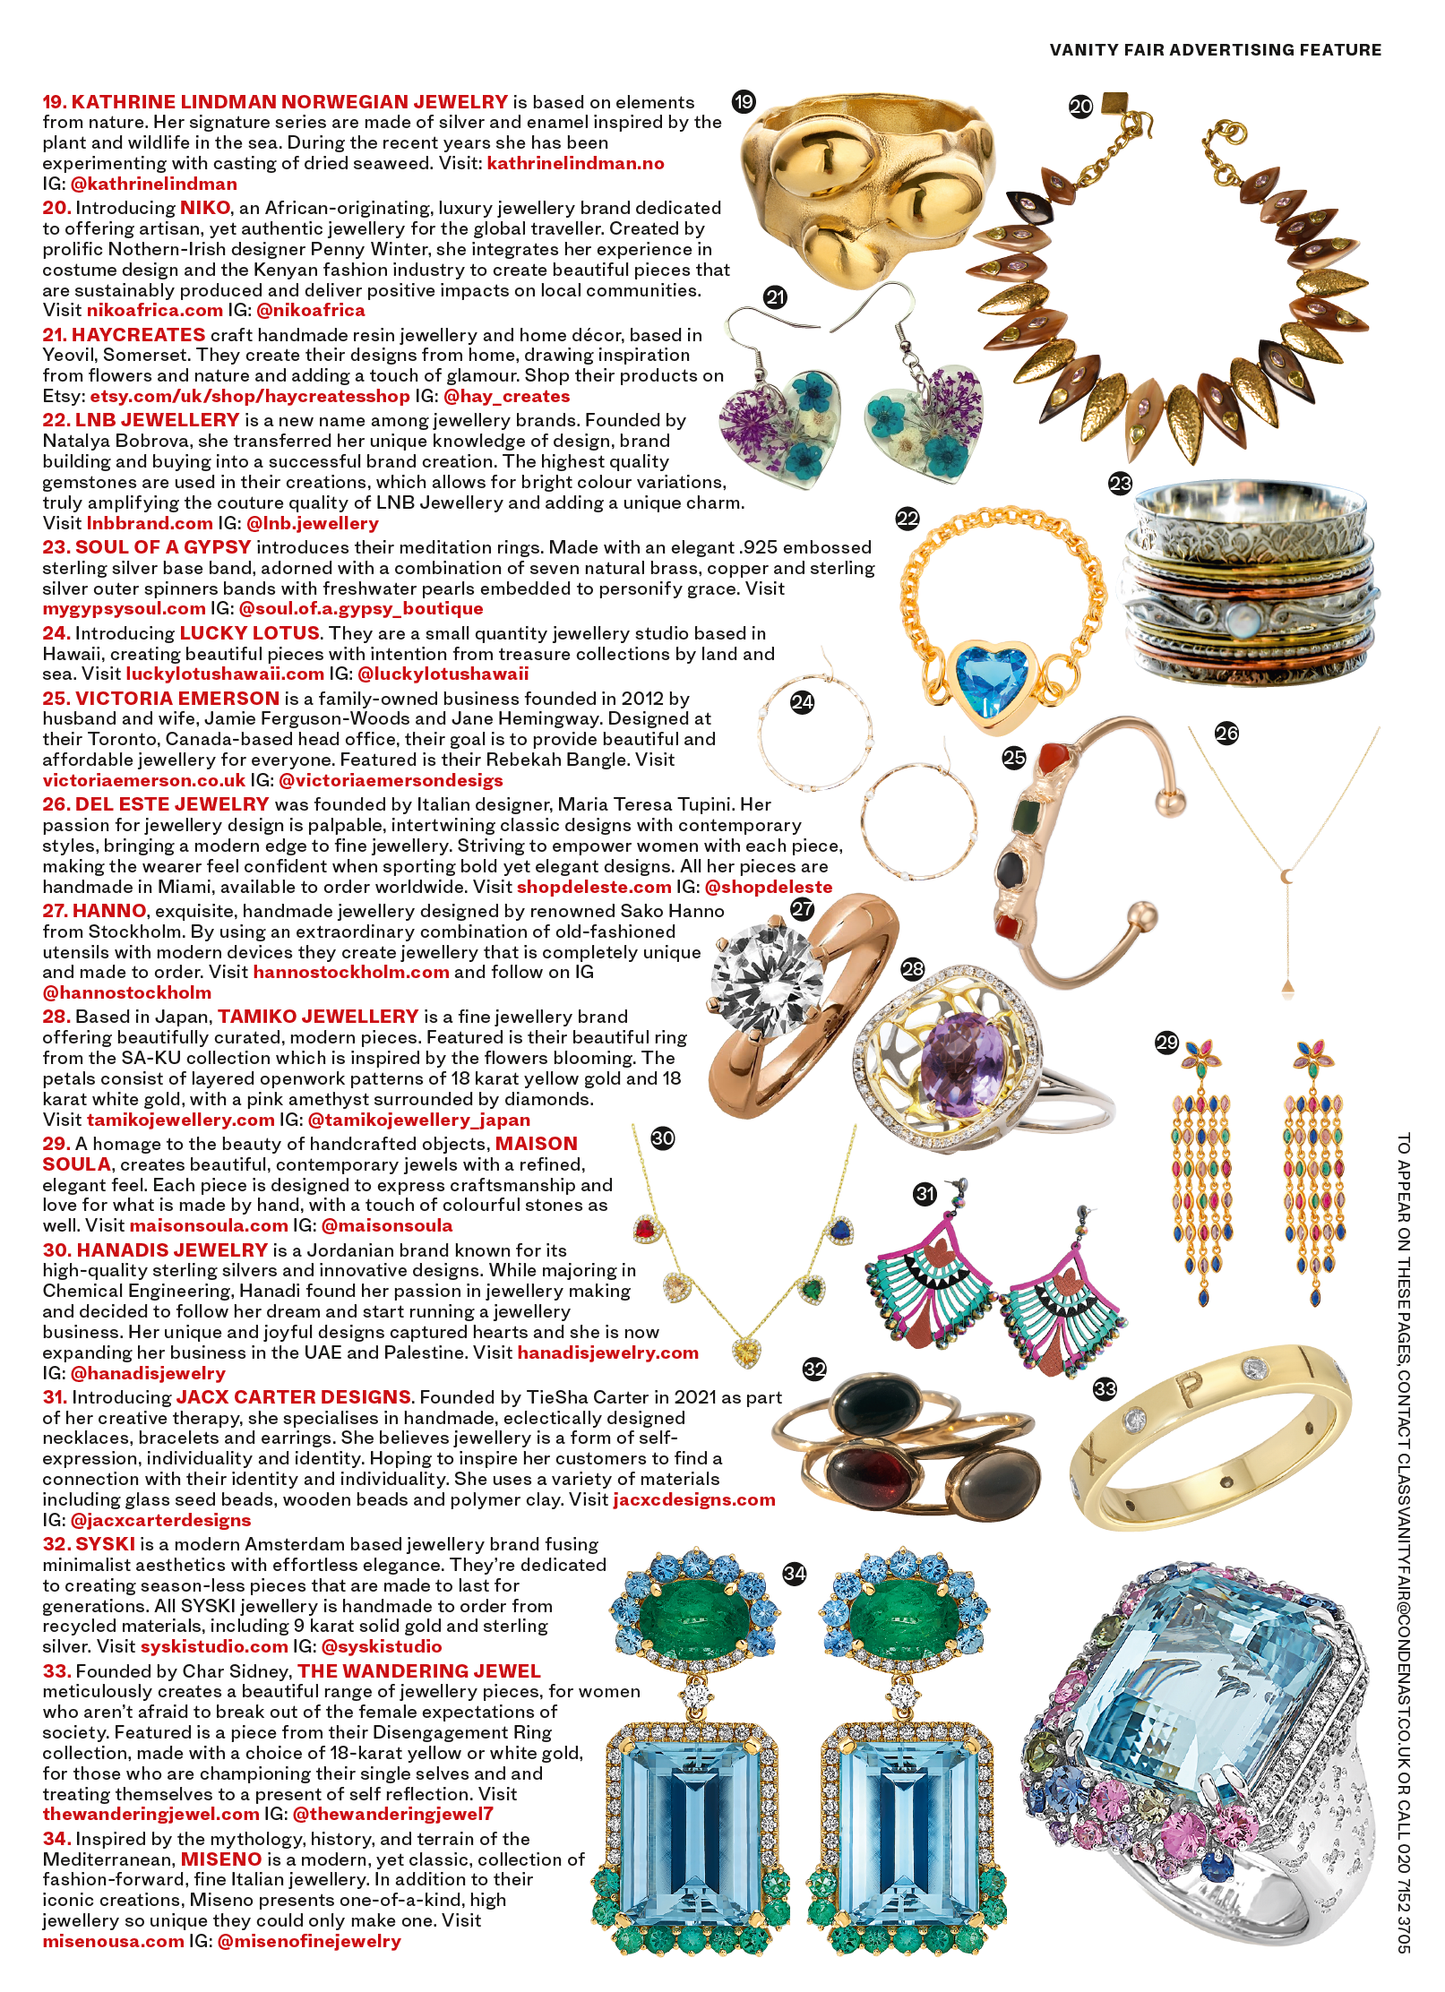 vanity Fair magazine jewelry section featuring the pillbox disengagement Ring from the wandering jewel